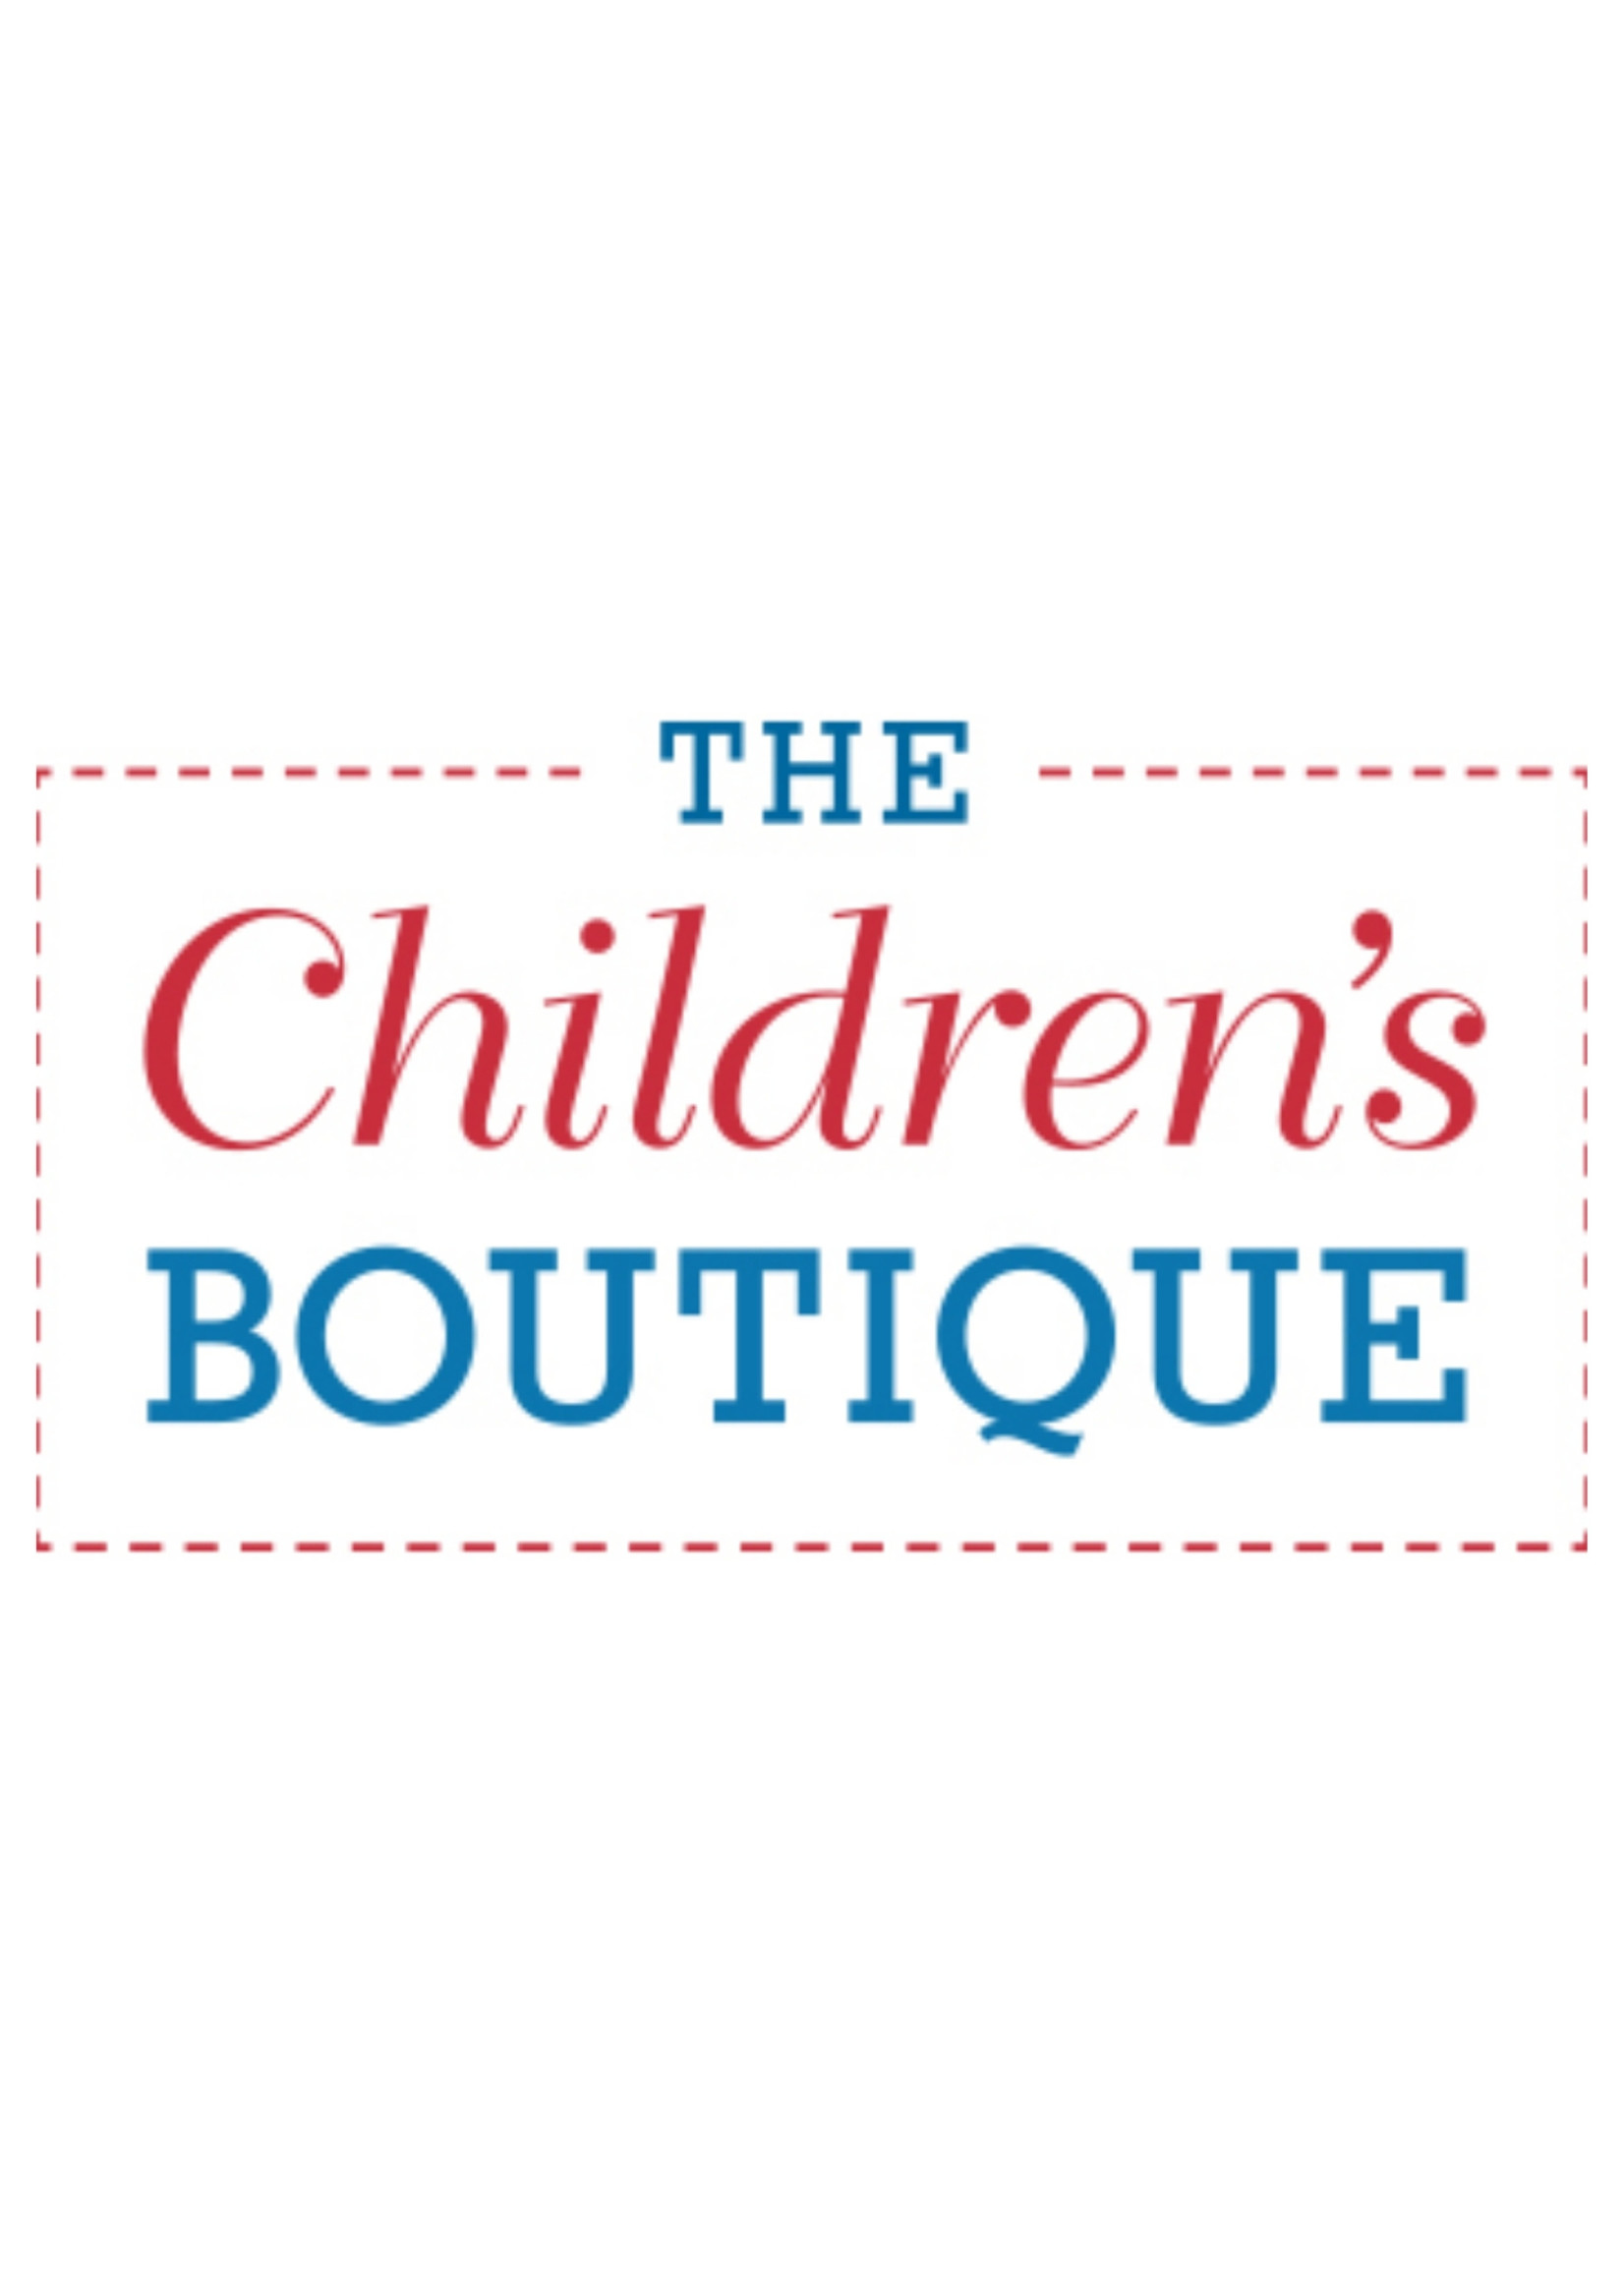 The Children's Boutique Gift Card